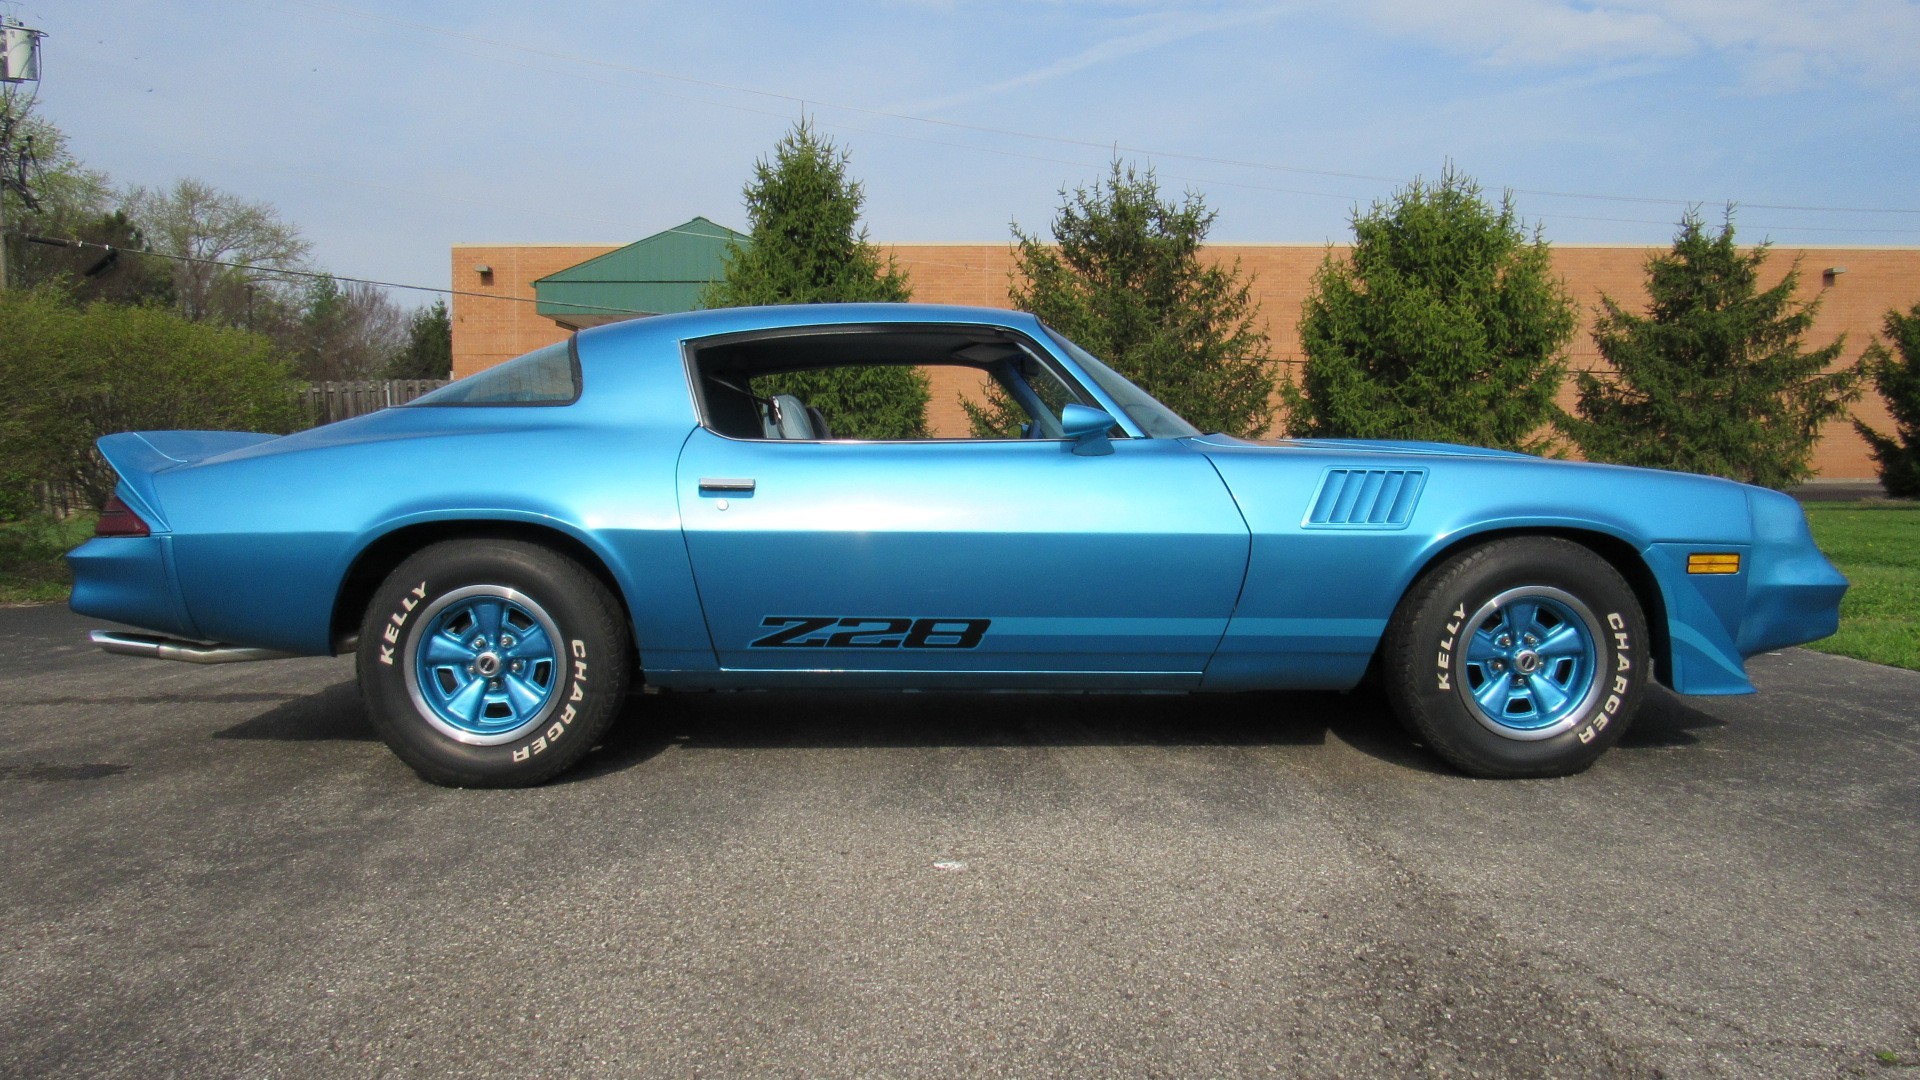 1979 Camaro Z28, 4 Speed, Crate Engine, Restored, SOLD! | Cincy Classic Cars